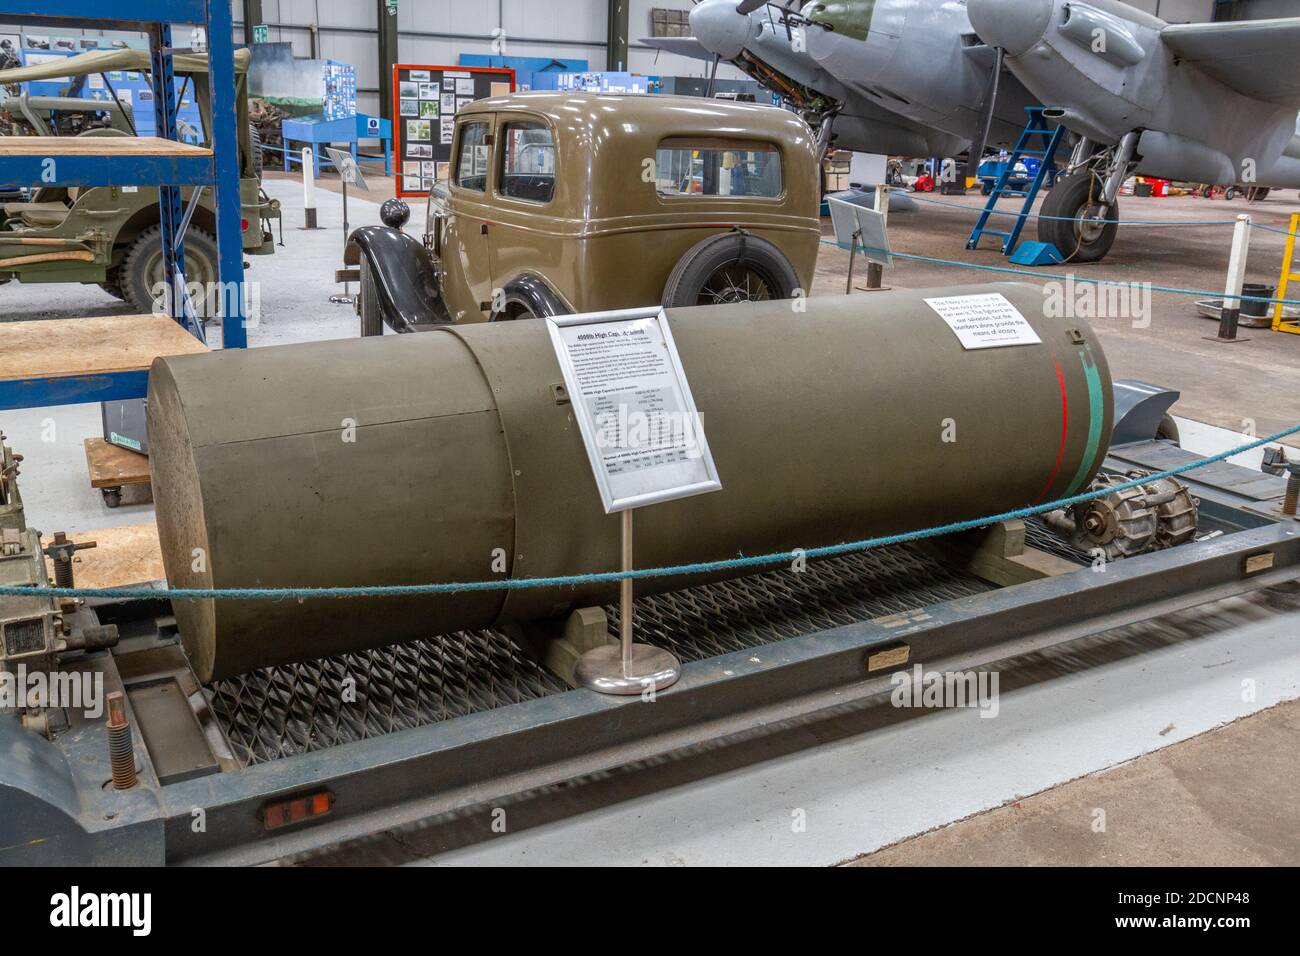 A 4,000lb High Capacity bomb, Lincolnshire Aviation Heritage Museum, East Kirkby, Spilsby, Lincs, UK. Stock Photo